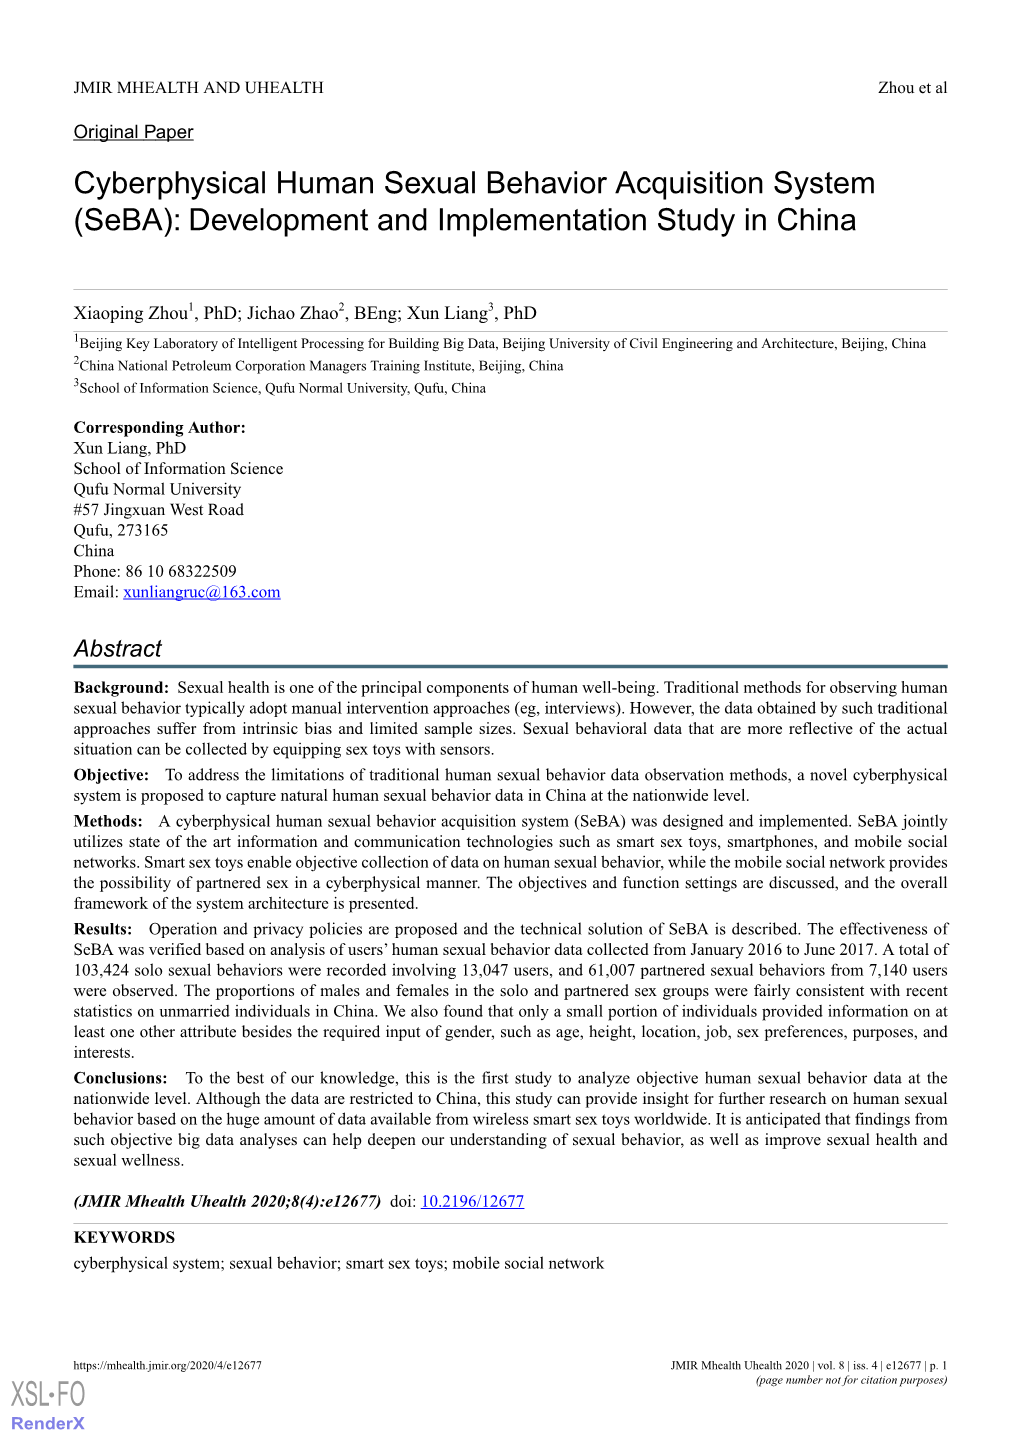 Cyberphysical Human Sexual Behavior Acquisition System (Seba): Development and Implementation Study in China